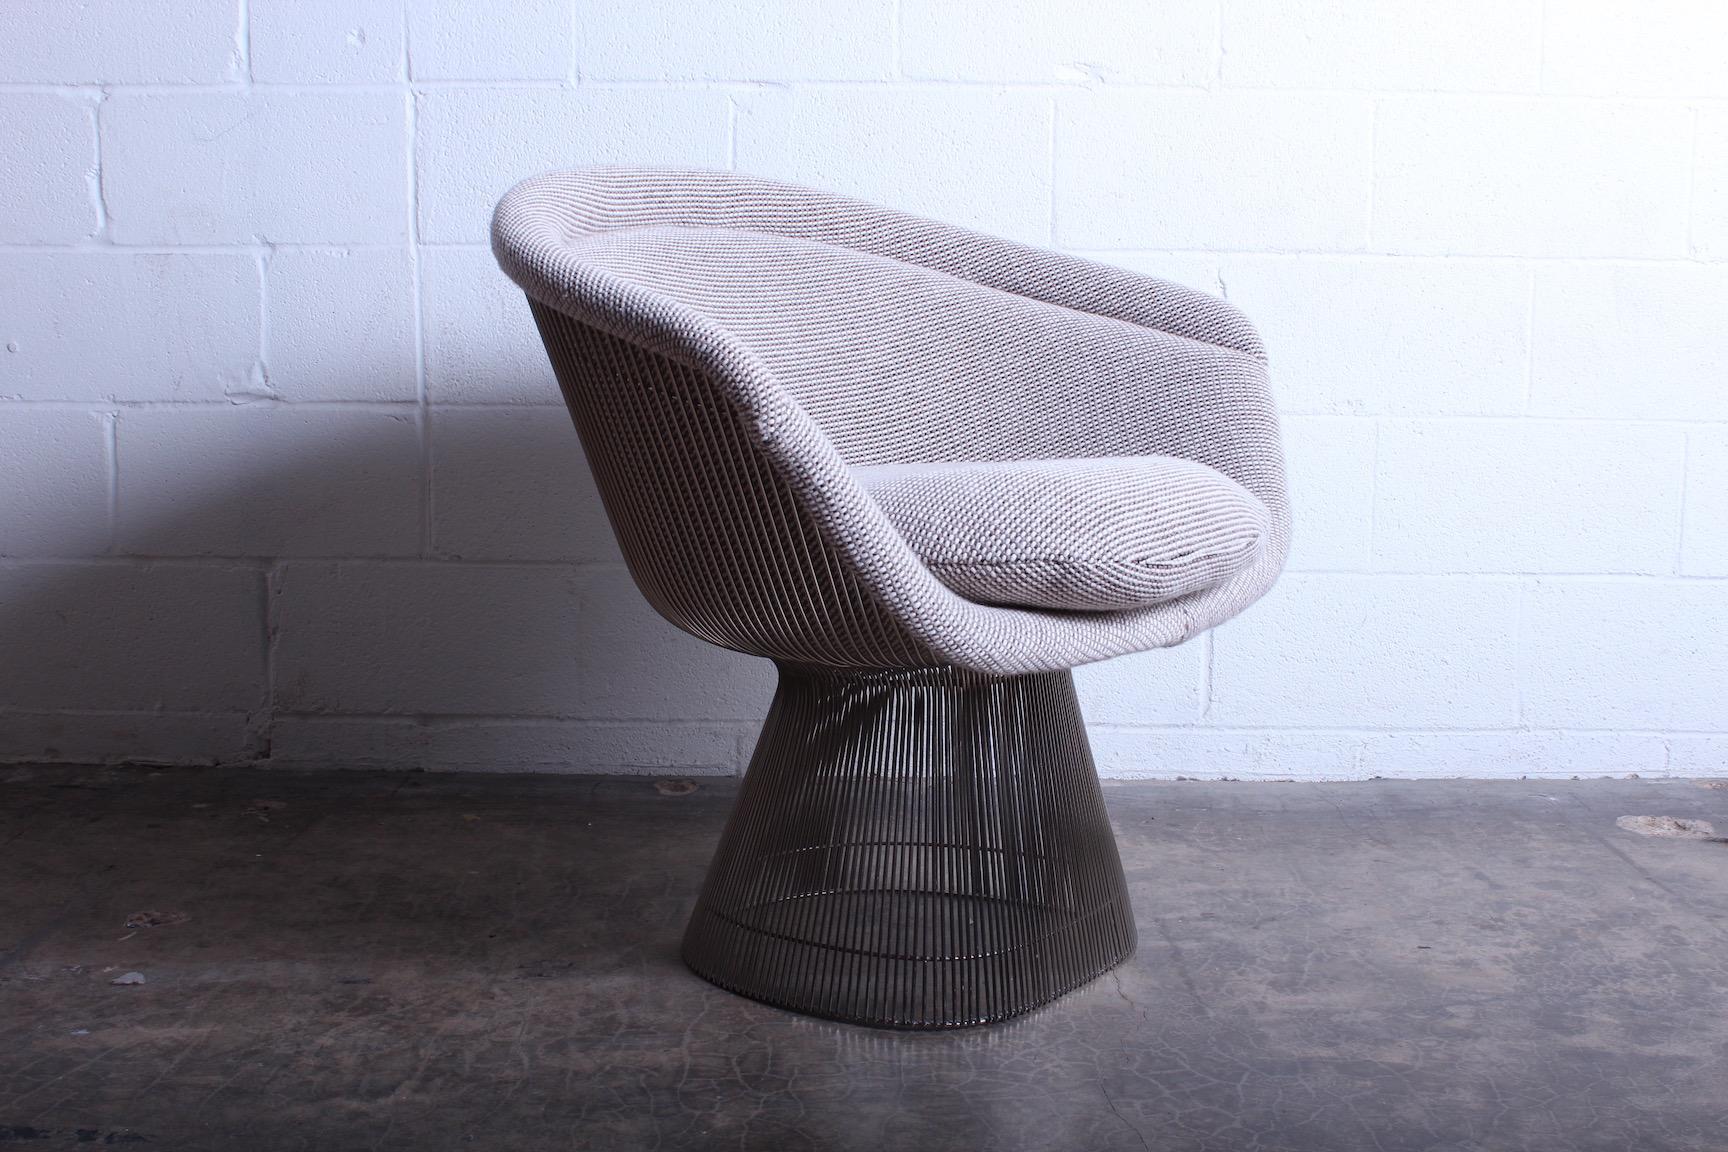 A nickel-plated lounge chair by Warren Platner for Knoll. Older upholstery in Knoll Cato wool that looks to be not original.